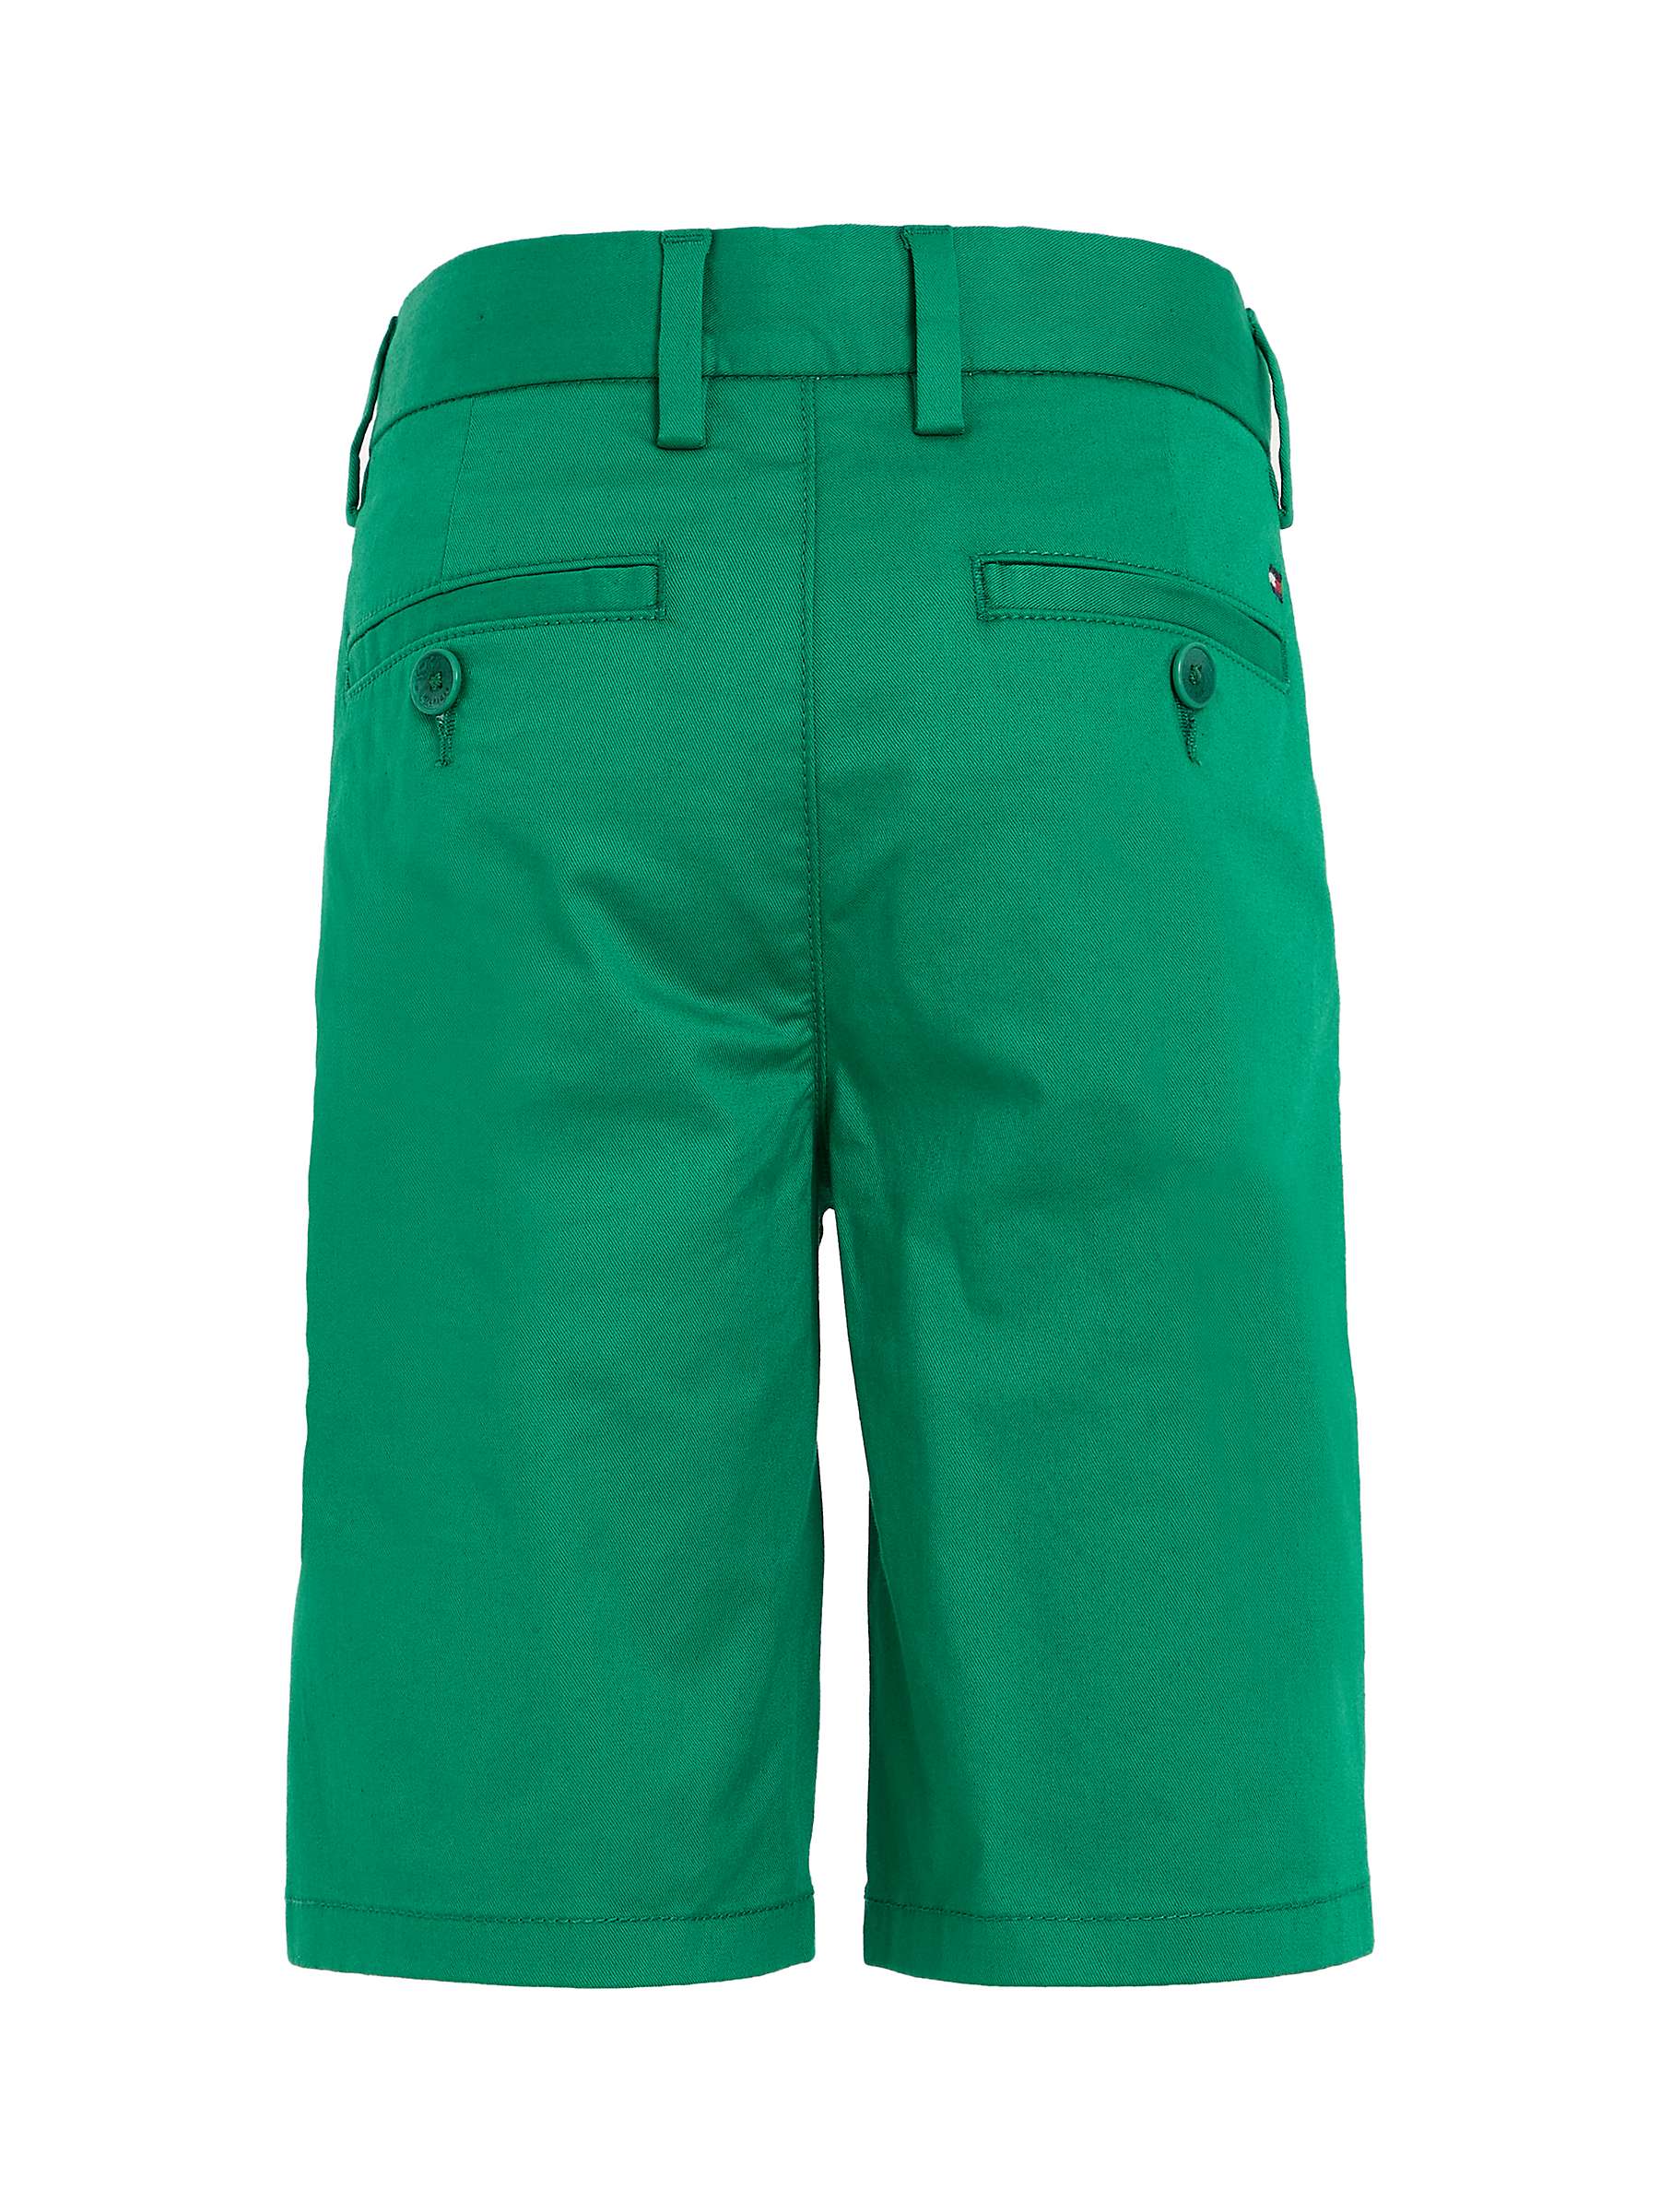 Buy Tommy Hilfiger Kids' 1985 Chino Shorts, Olympic Green Online at johnlewis.com